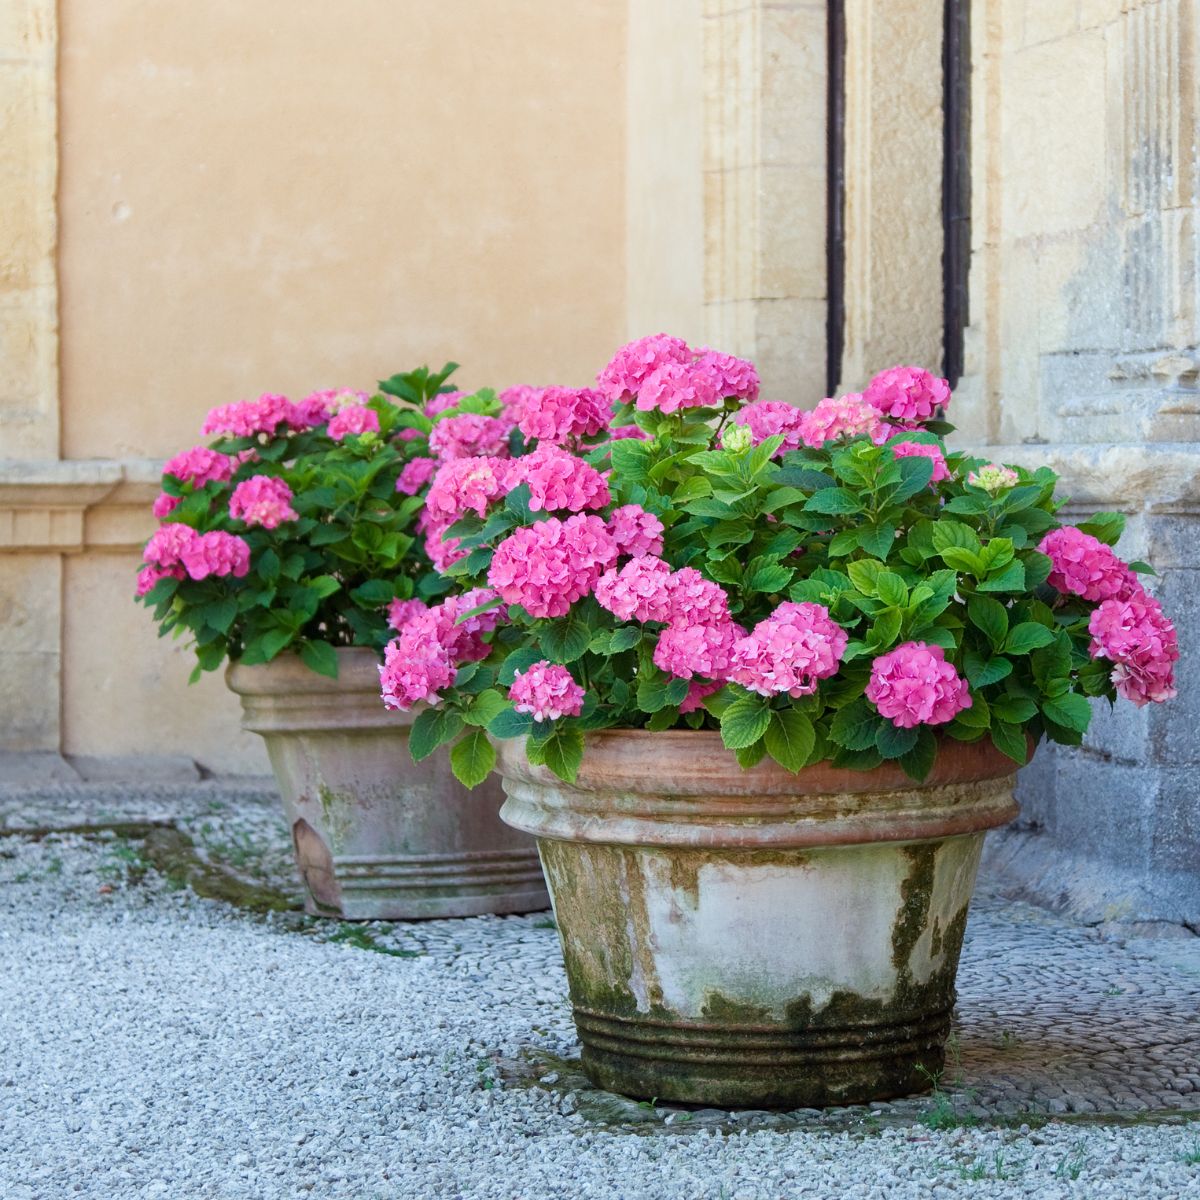 Potted pink hydrangeas.